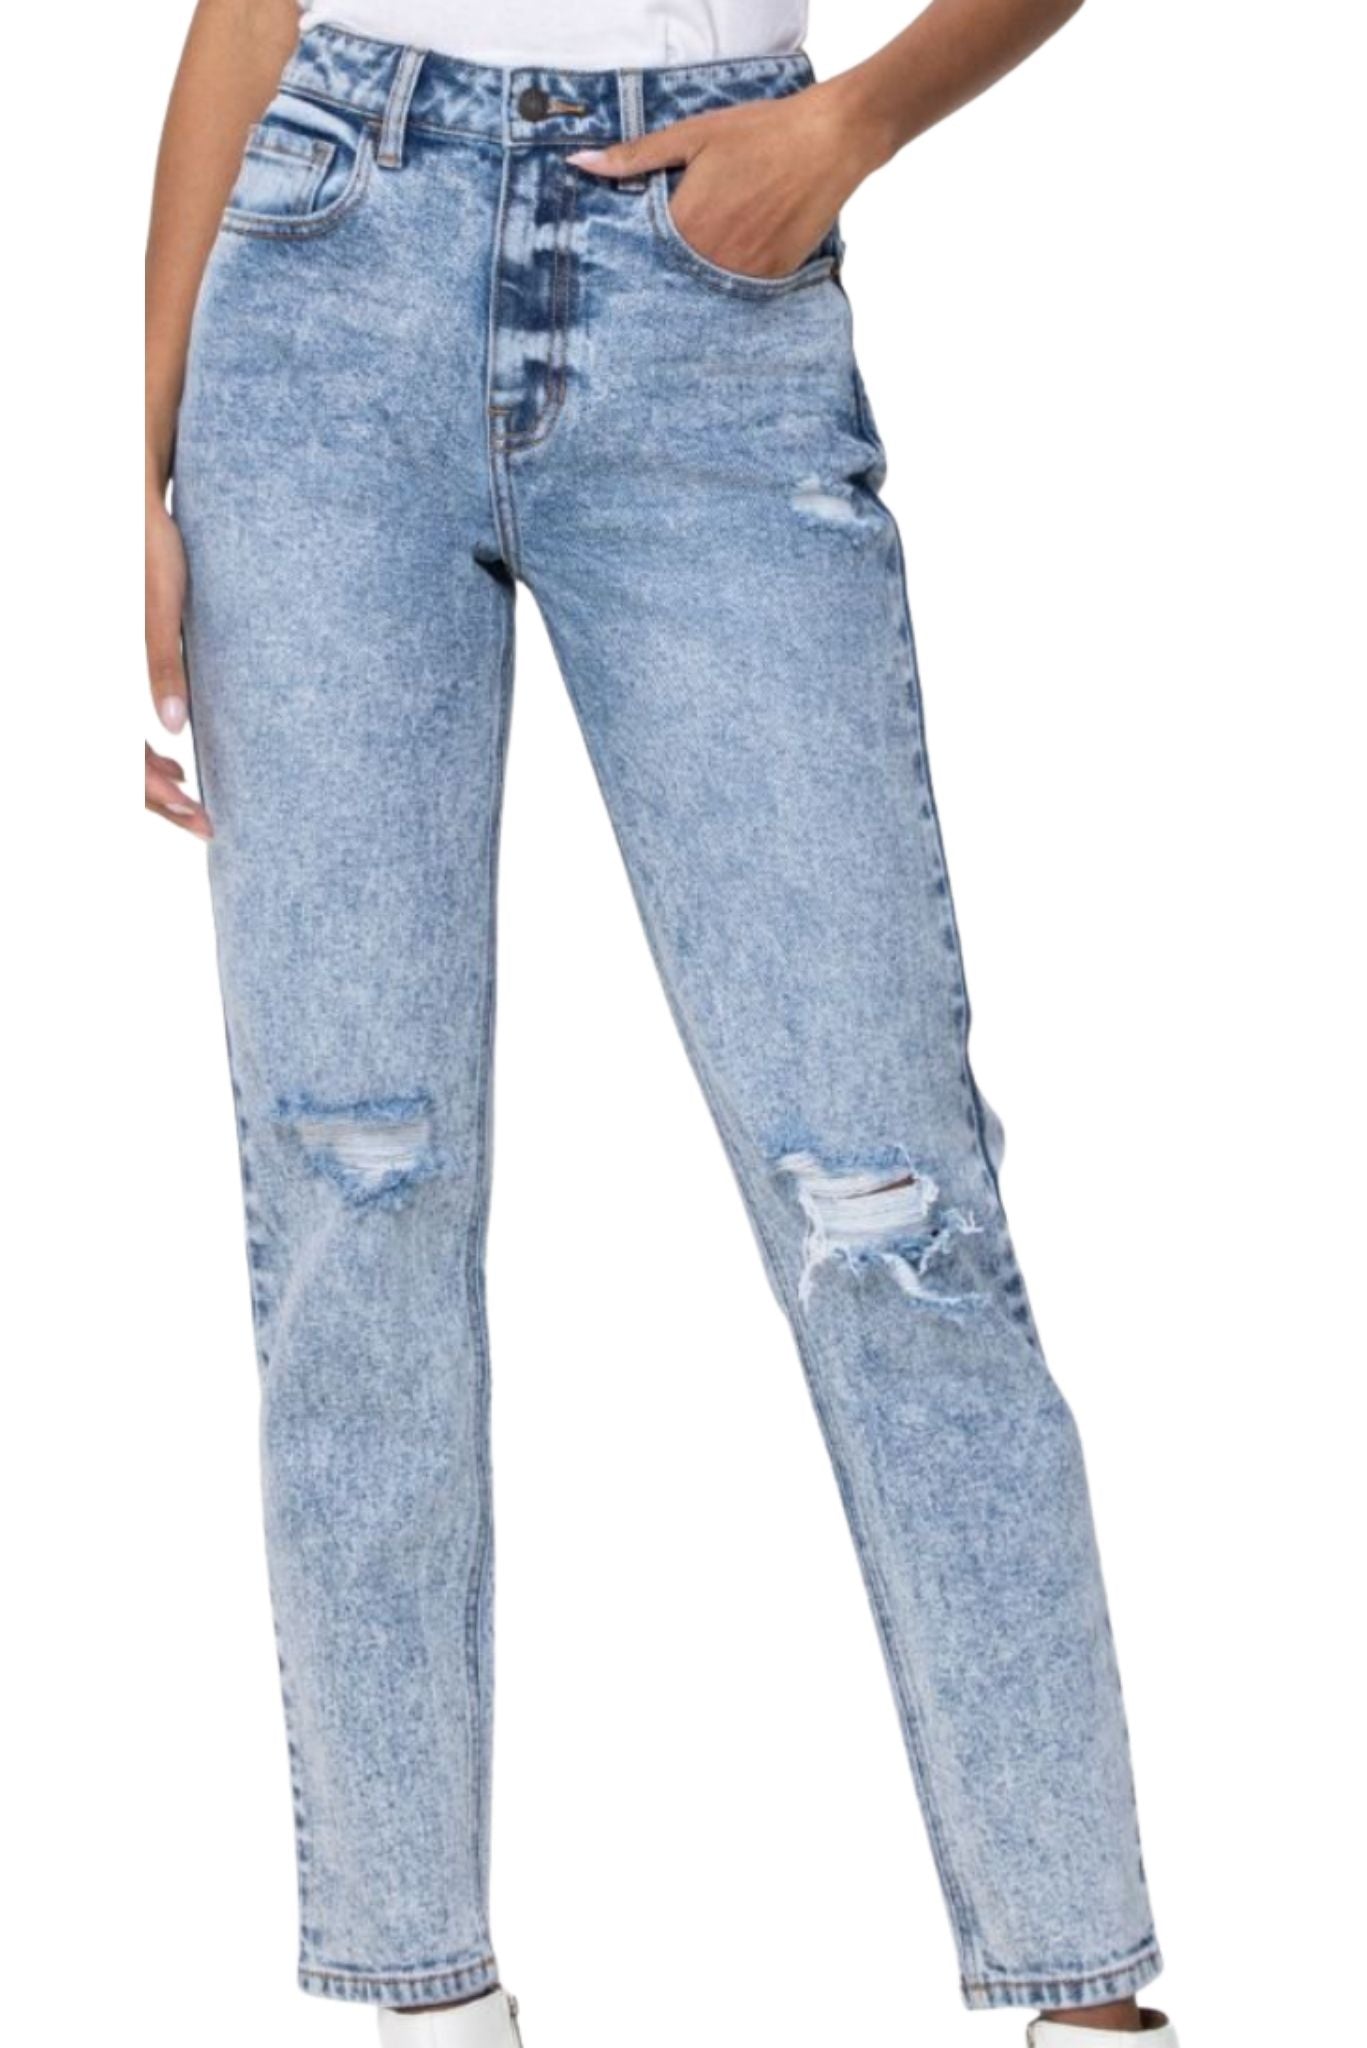 Load image into Gallery viewer, Light Acid Wash Slim Straight Leg Jeans w/ Distressing*FINAL SALE*
